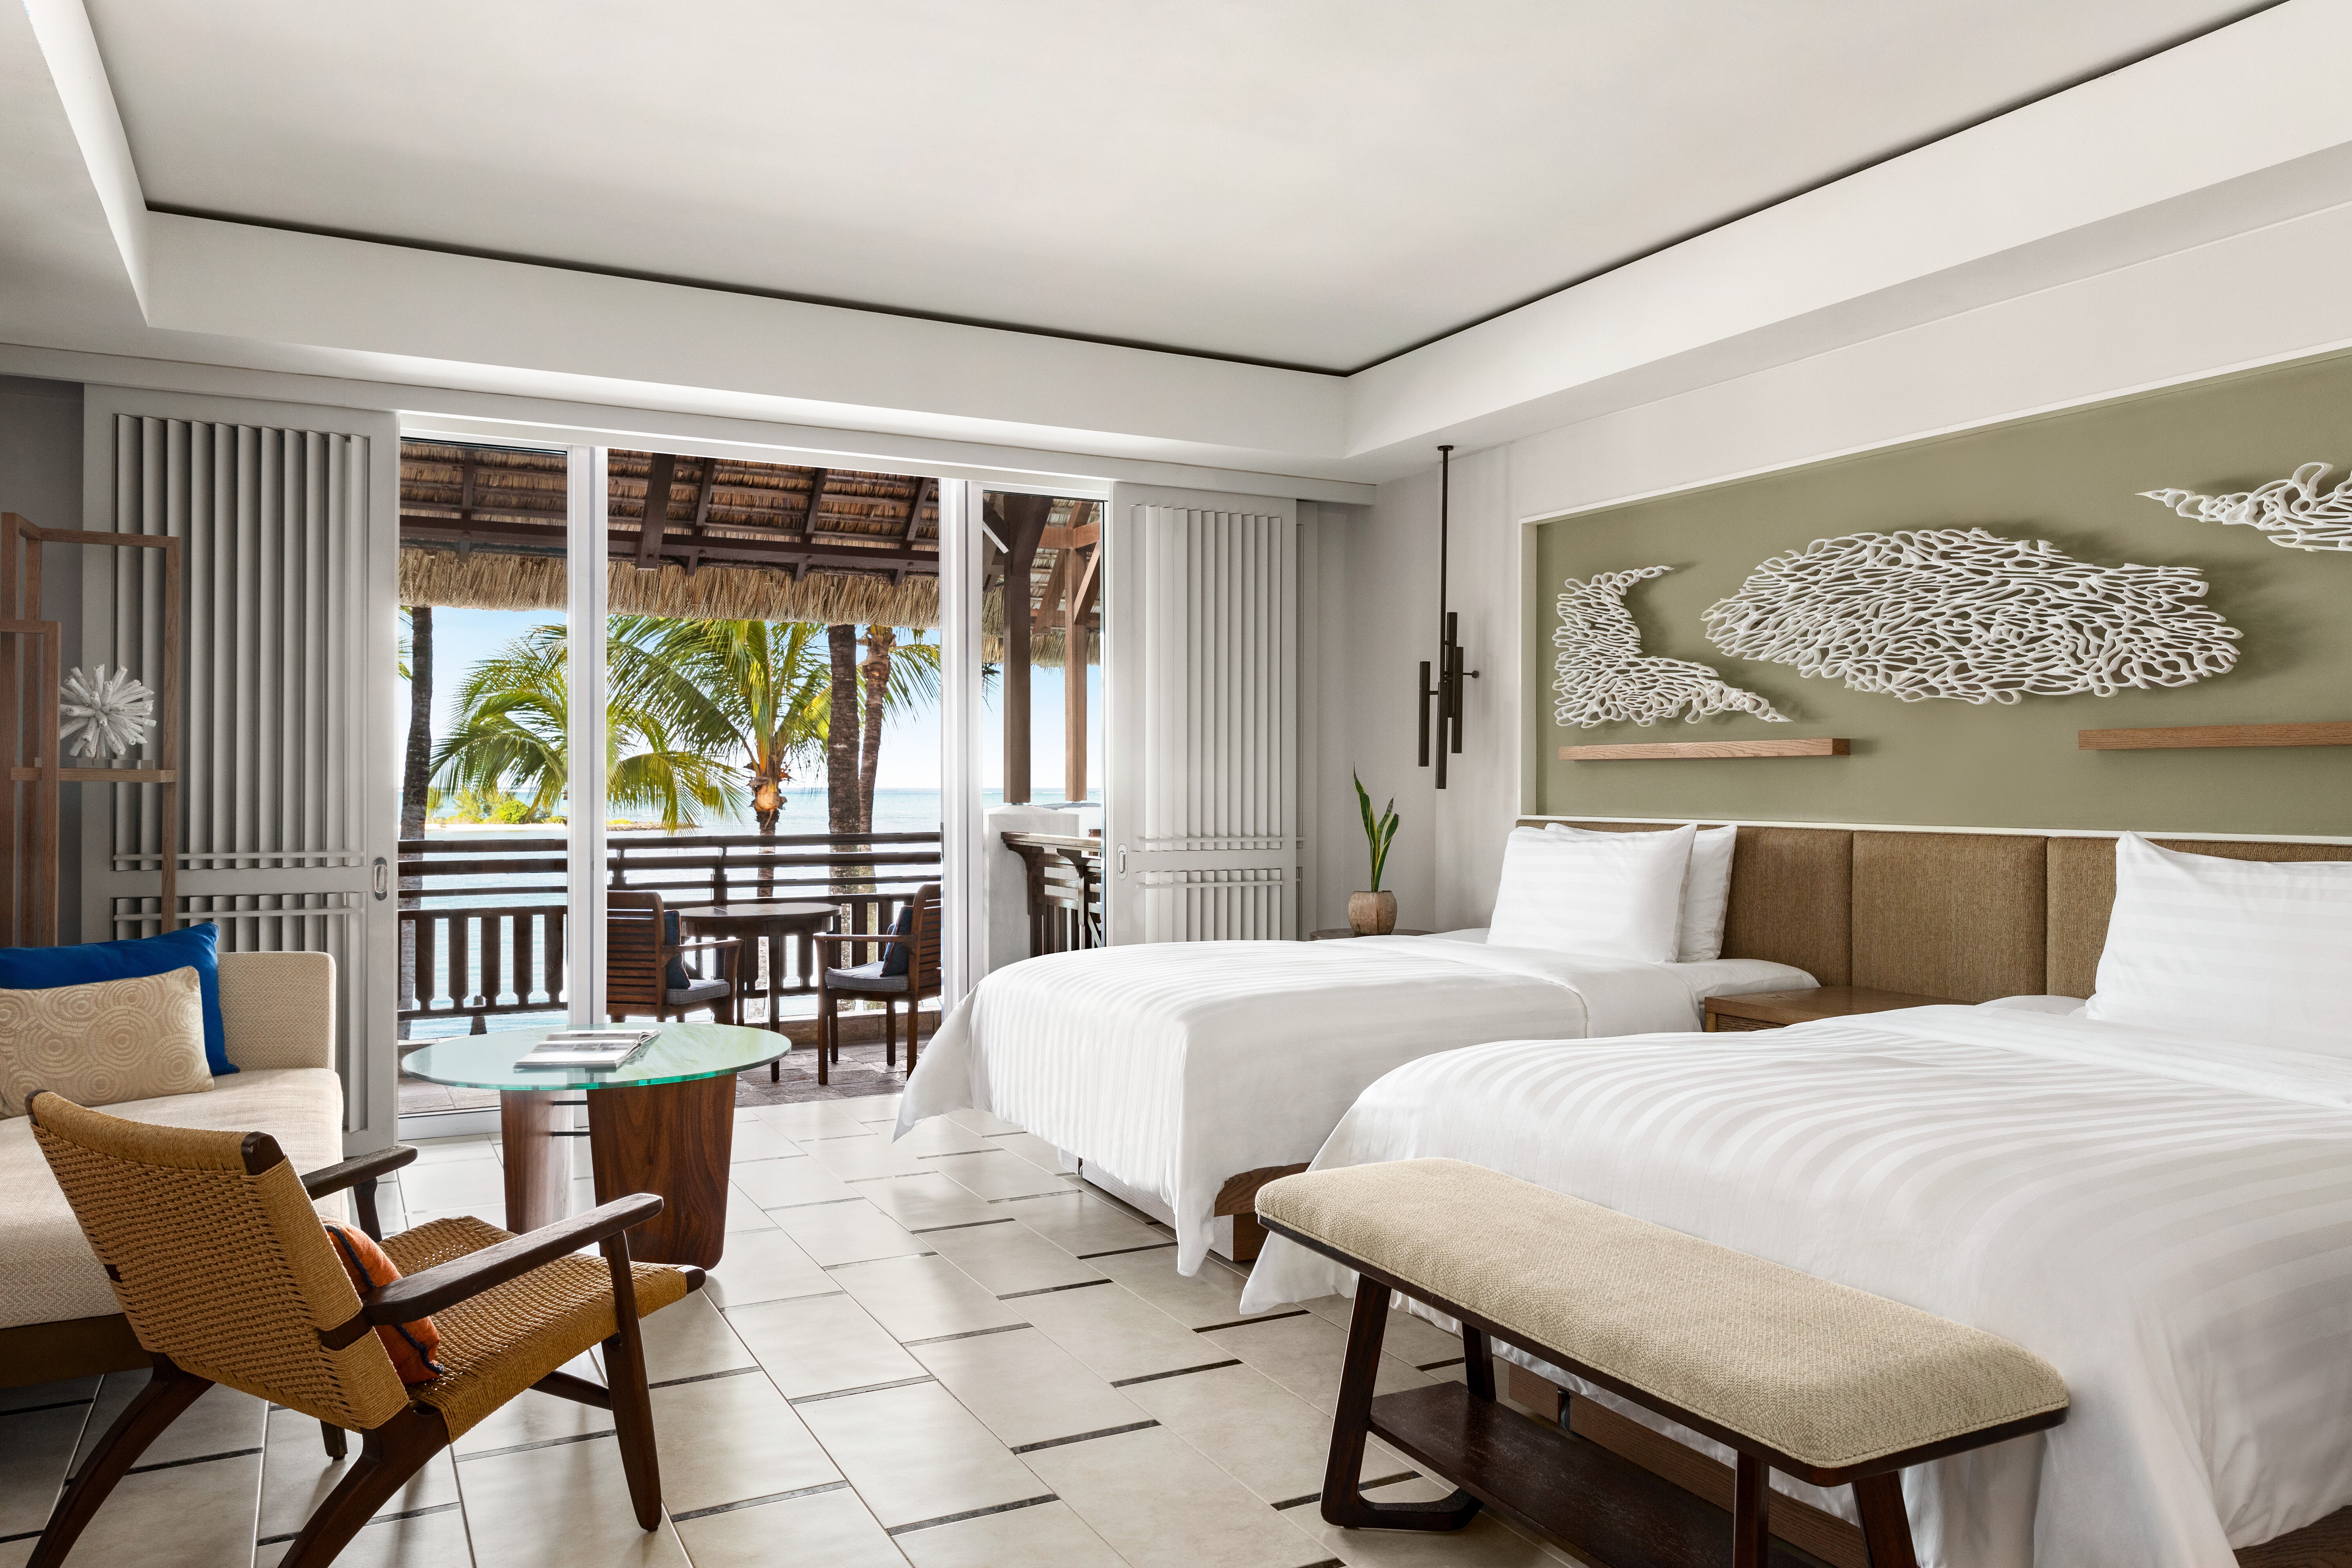 Shangri has six immaculate beaches nearby to explore